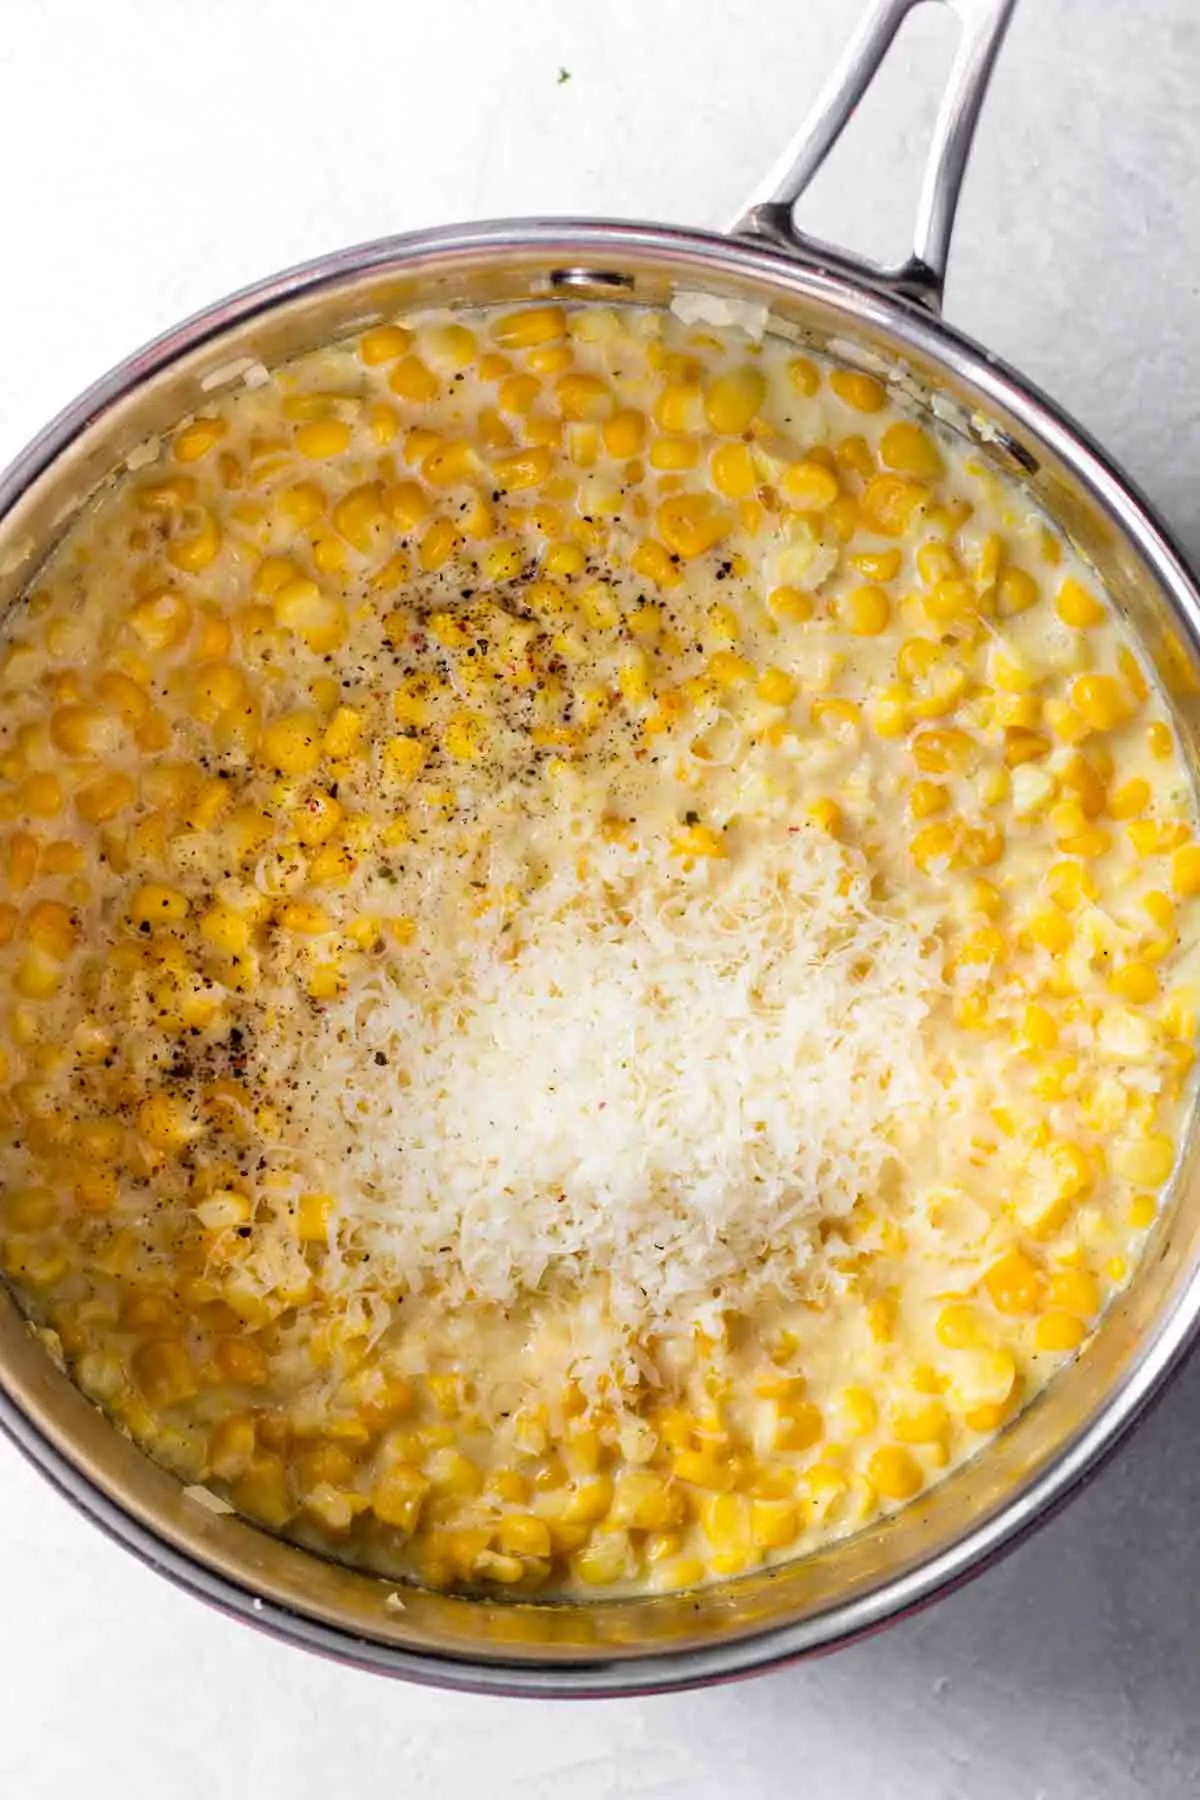 Pot filled with fresh corn, cream, seasonings and parmesan cheese to make homemade creamed corn.